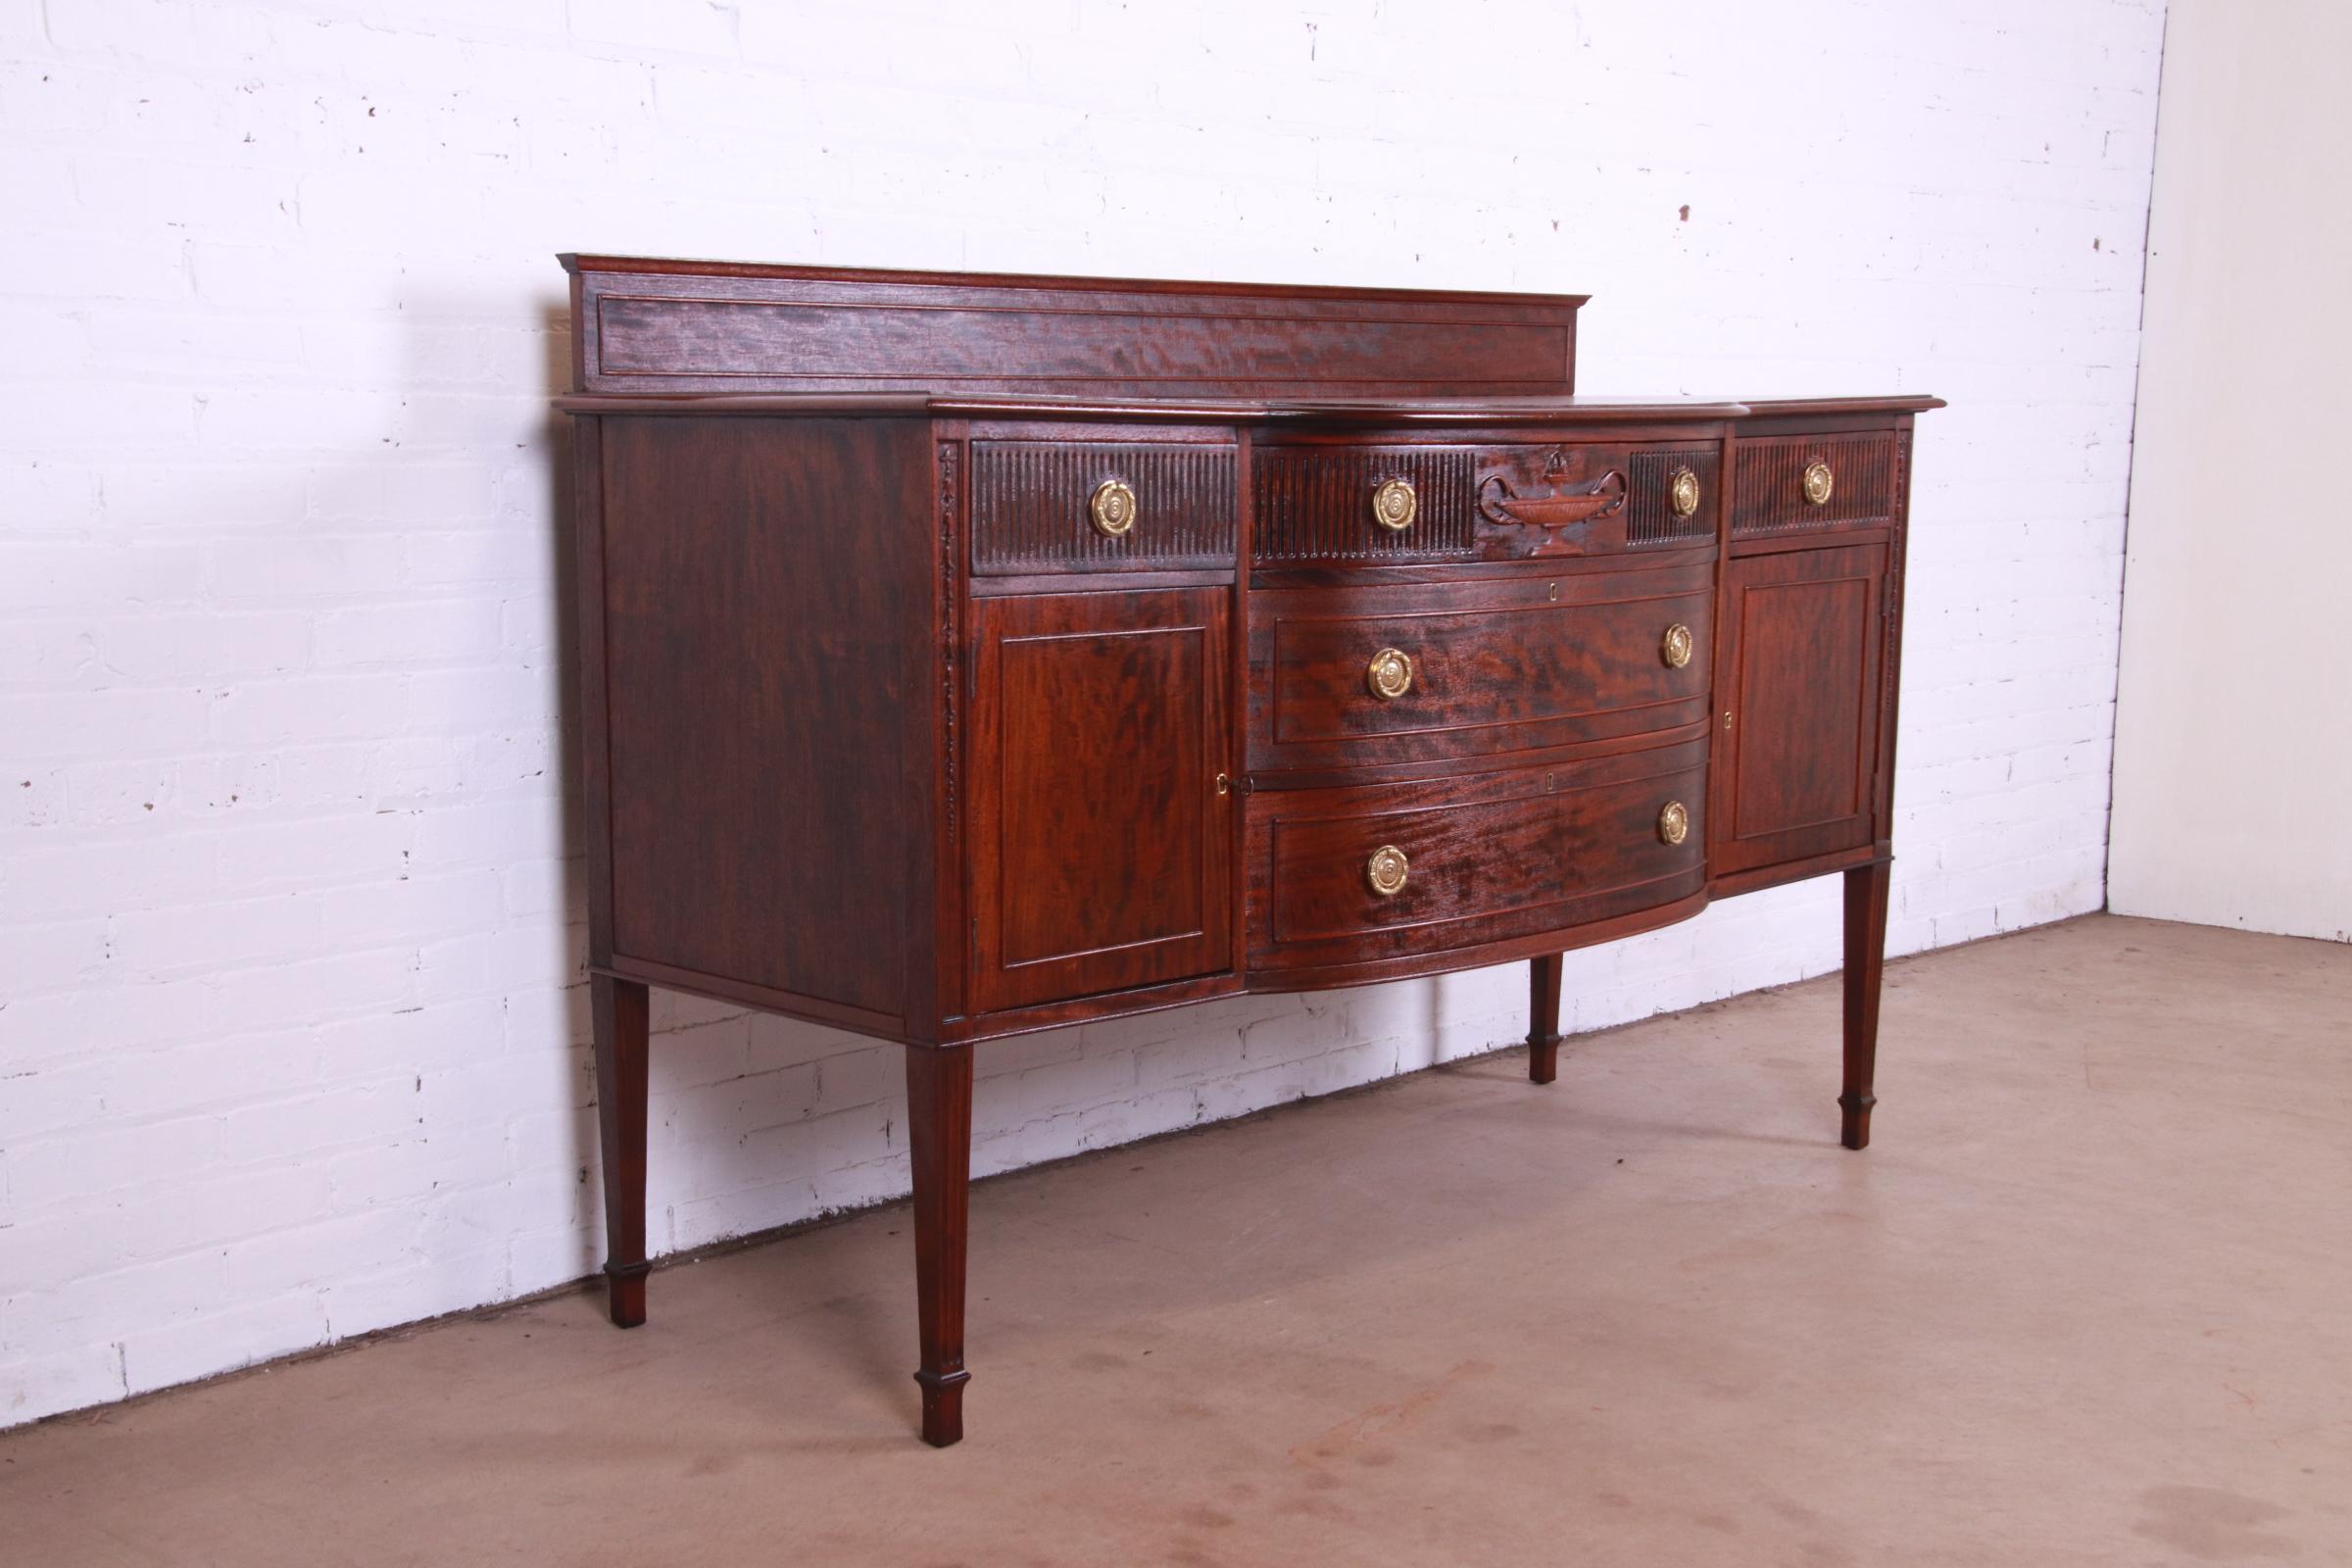 Brass Antique French Regency Louis XVI Style Carved Mahogany Sideboard or Bar Cabinet For Sale